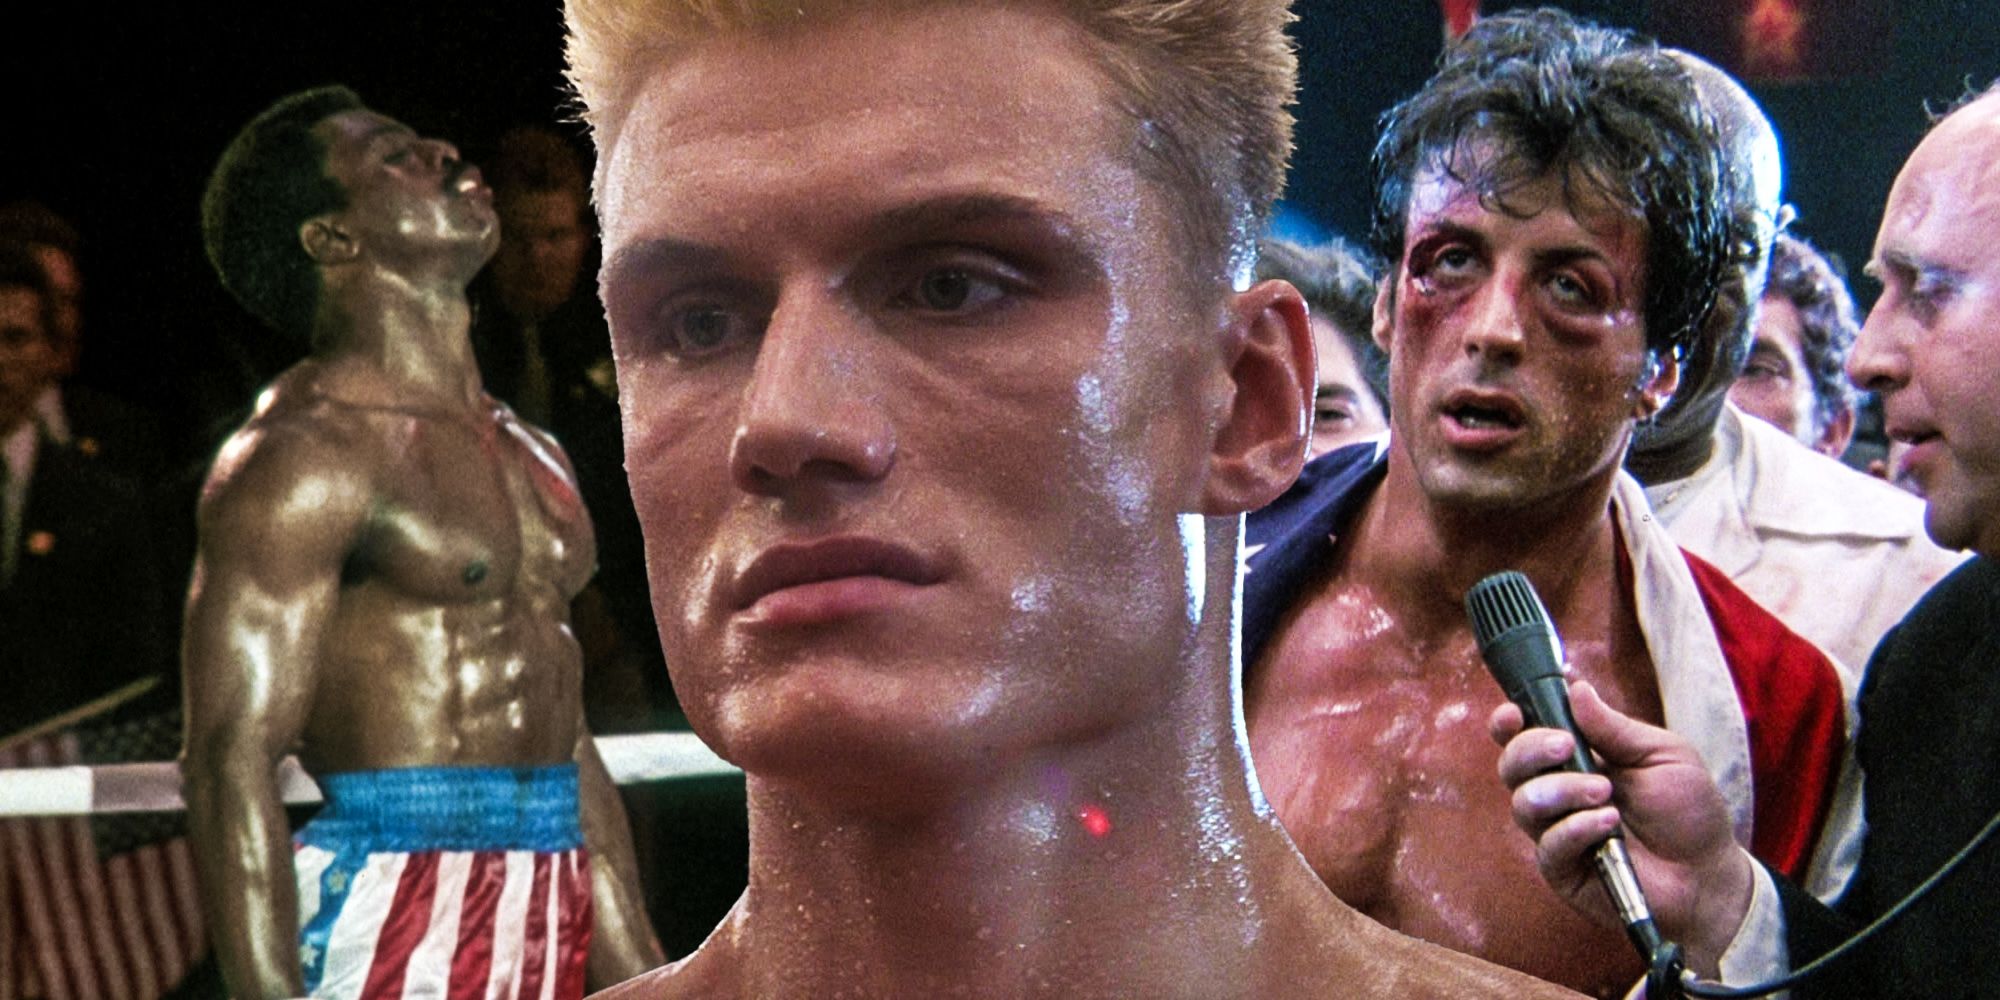 https://static1.srcdn.com/wordpress/wp-content/uploads/2022/04/Rocky-IV-Ruined-The-Best-Things-About-Balboa-Movies-Drago-Apollo.jpg